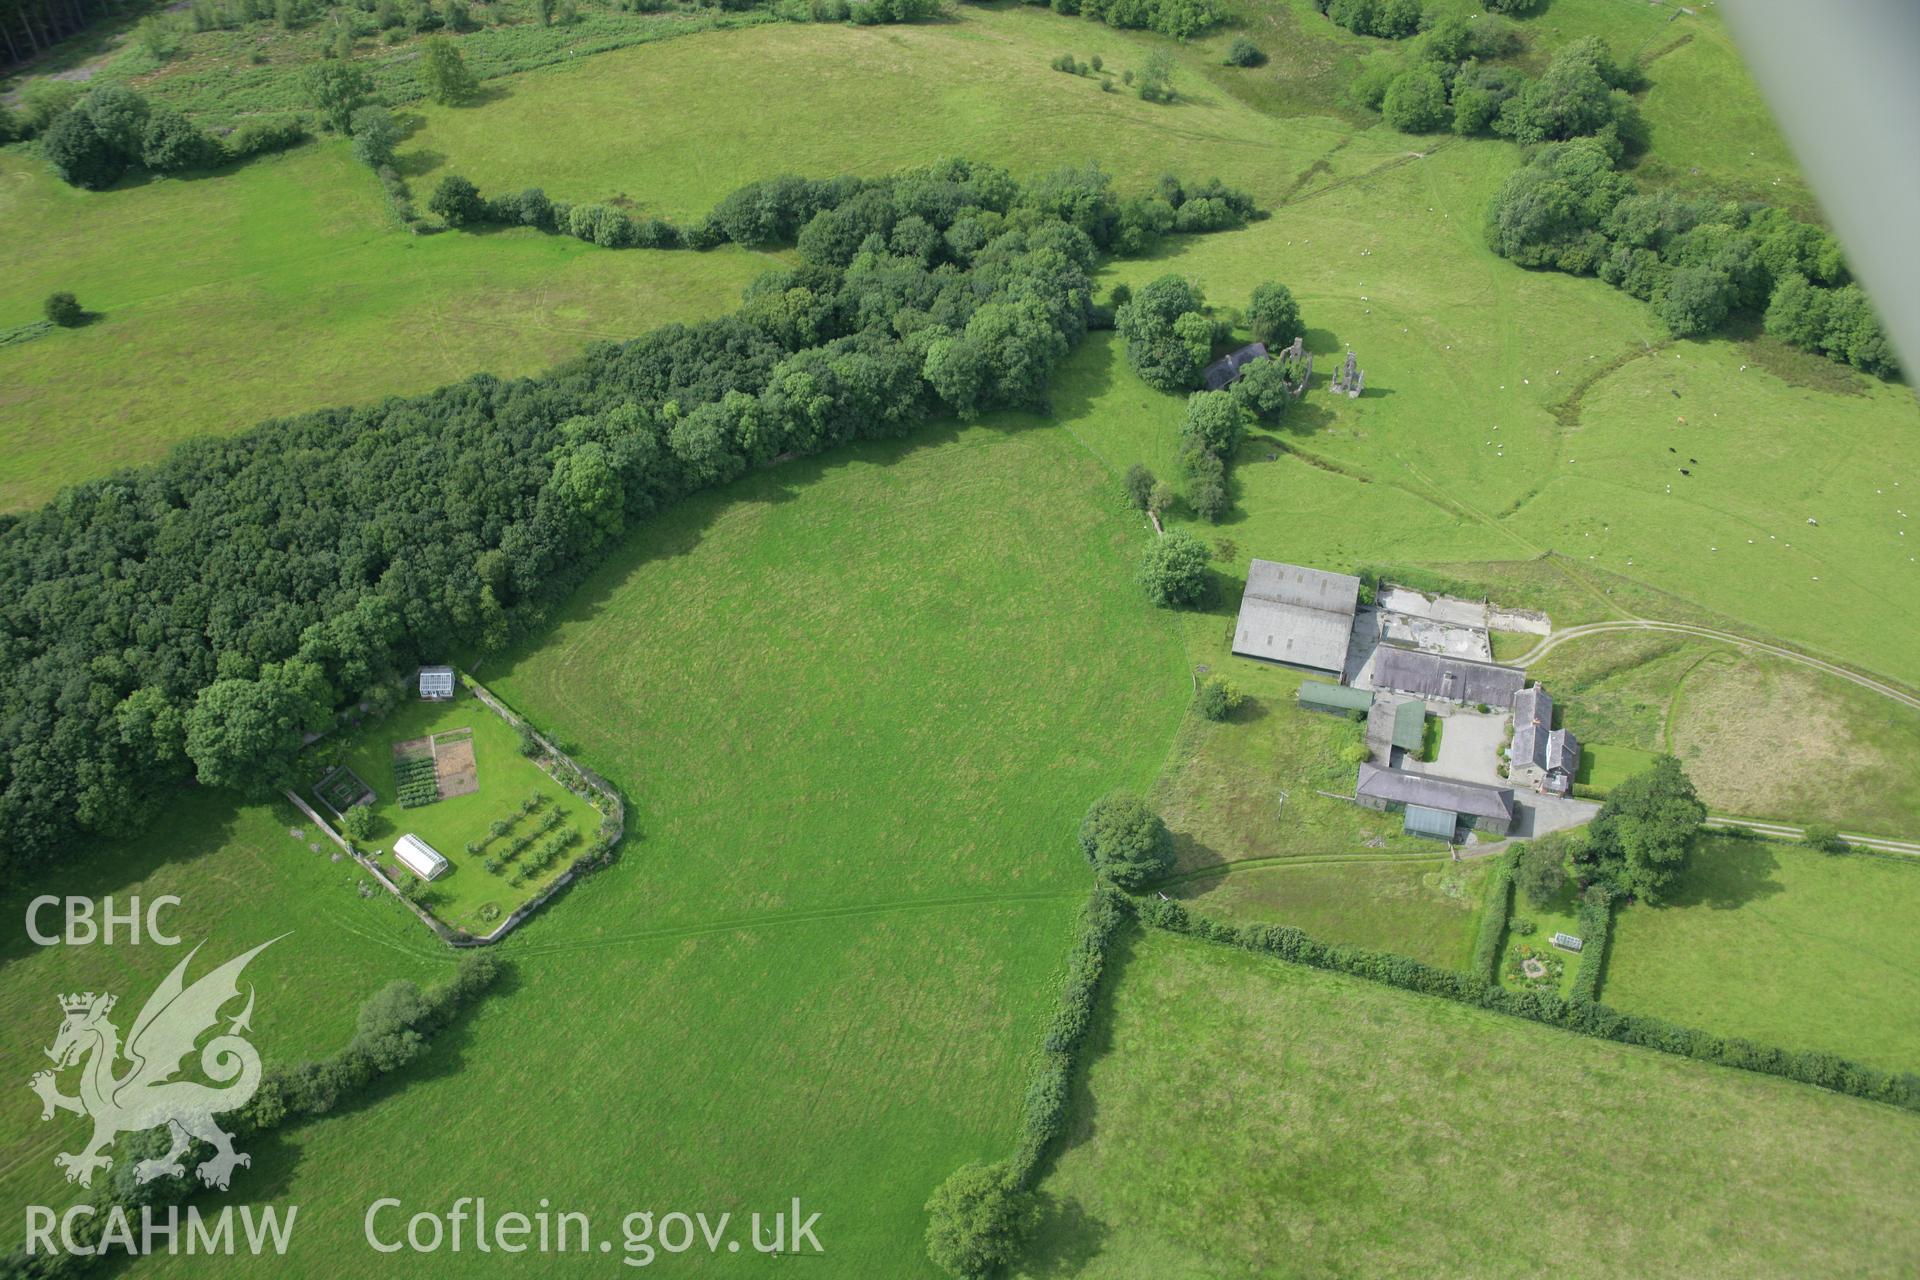 RCAHMW colour oblique aerial photograph of Llwynywormwood House and Garden. Taken on 09 July 2007 by Toby Driver